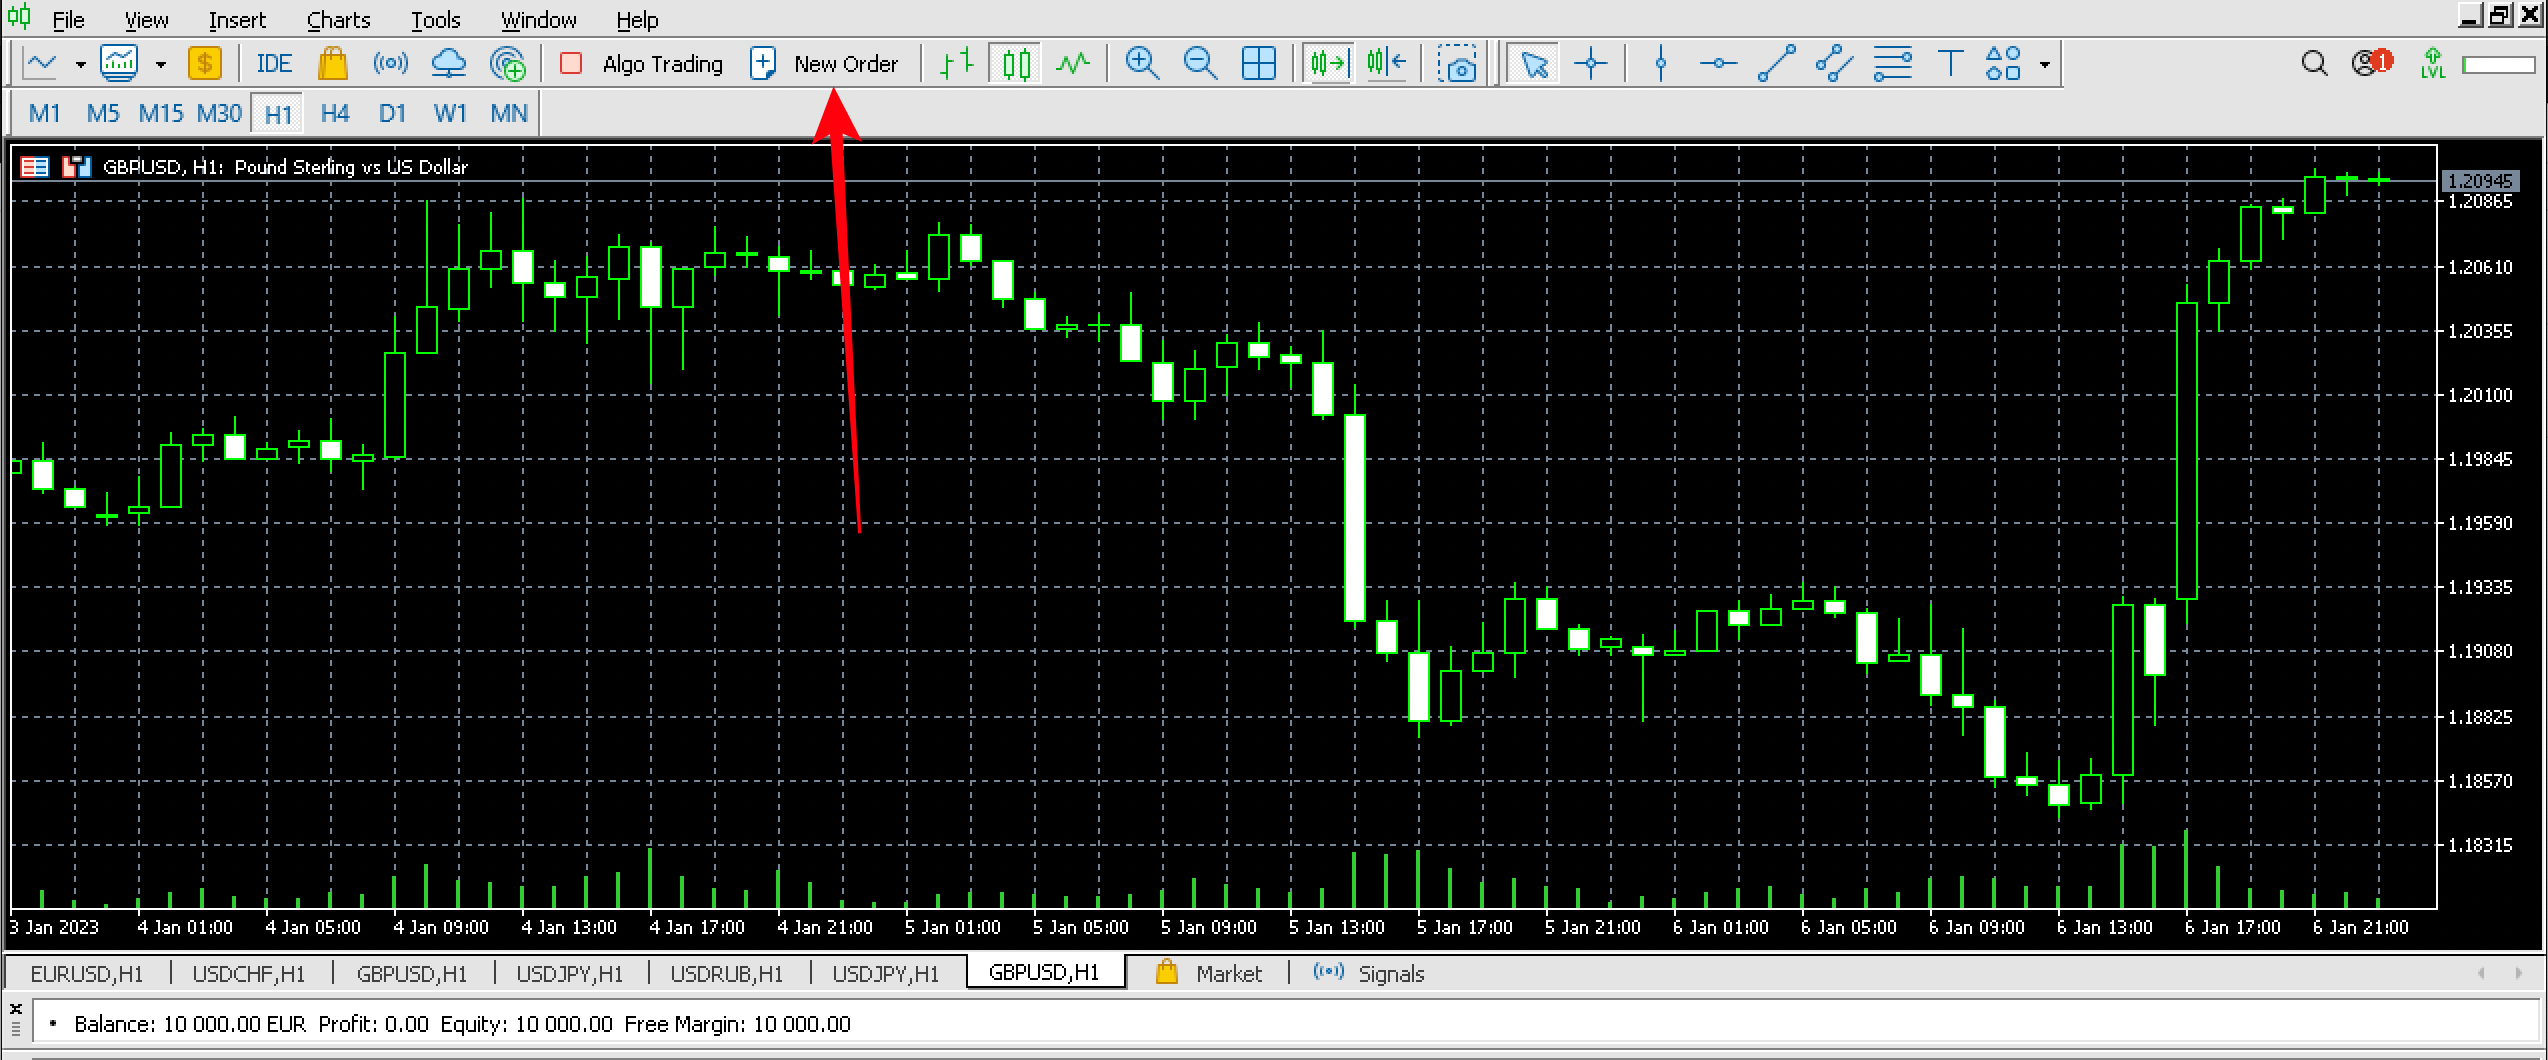 How to place an order and trade on the MetaTrader 5